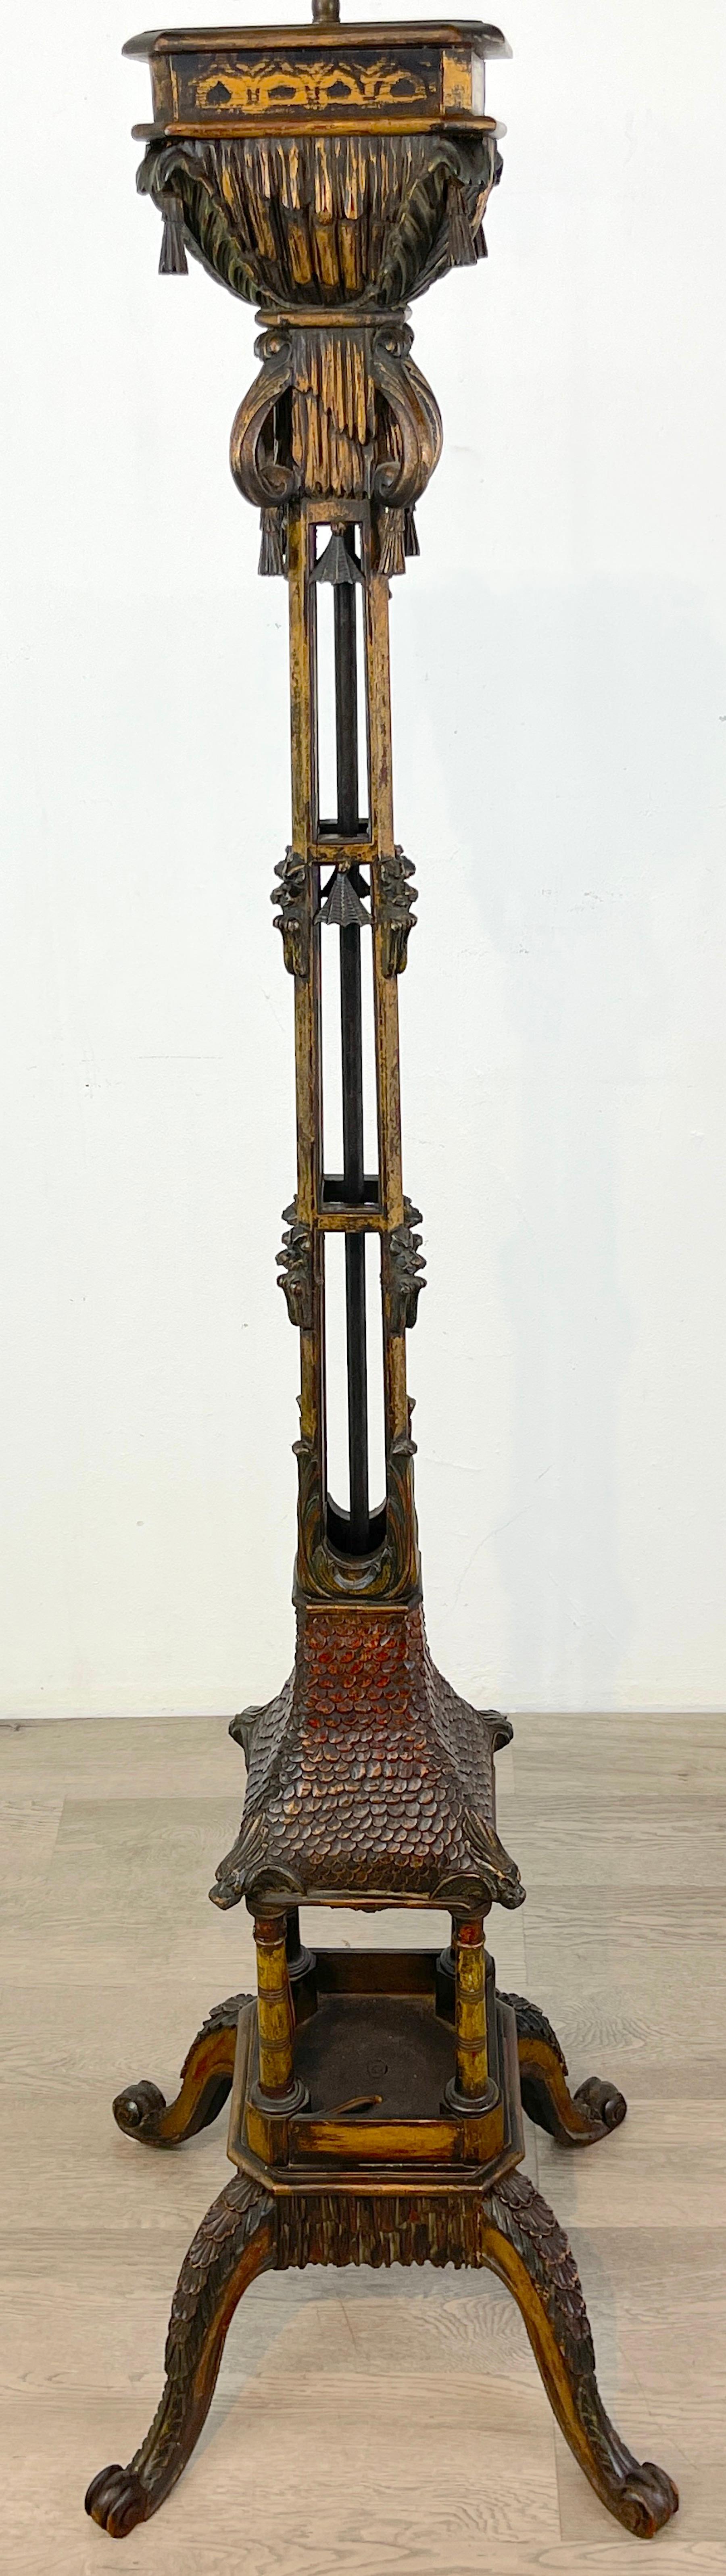 English Carved & Polychromed Wood Chinoiserie Pagoda Motif Floor Lamp, England, C 1900s For Sale